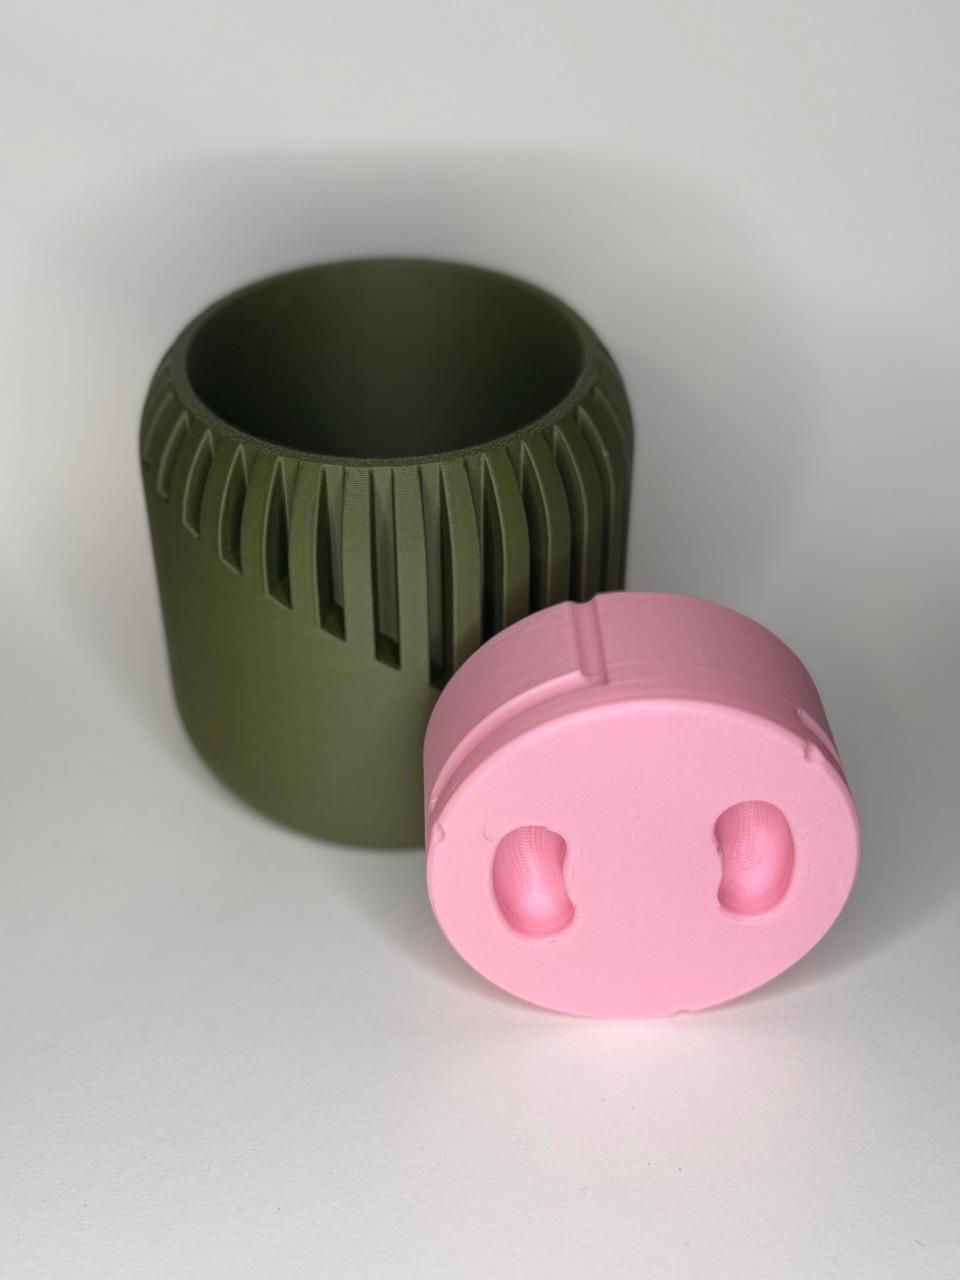 Slope Planter with Hidden "Pig Nose" Drip Tray 3d model